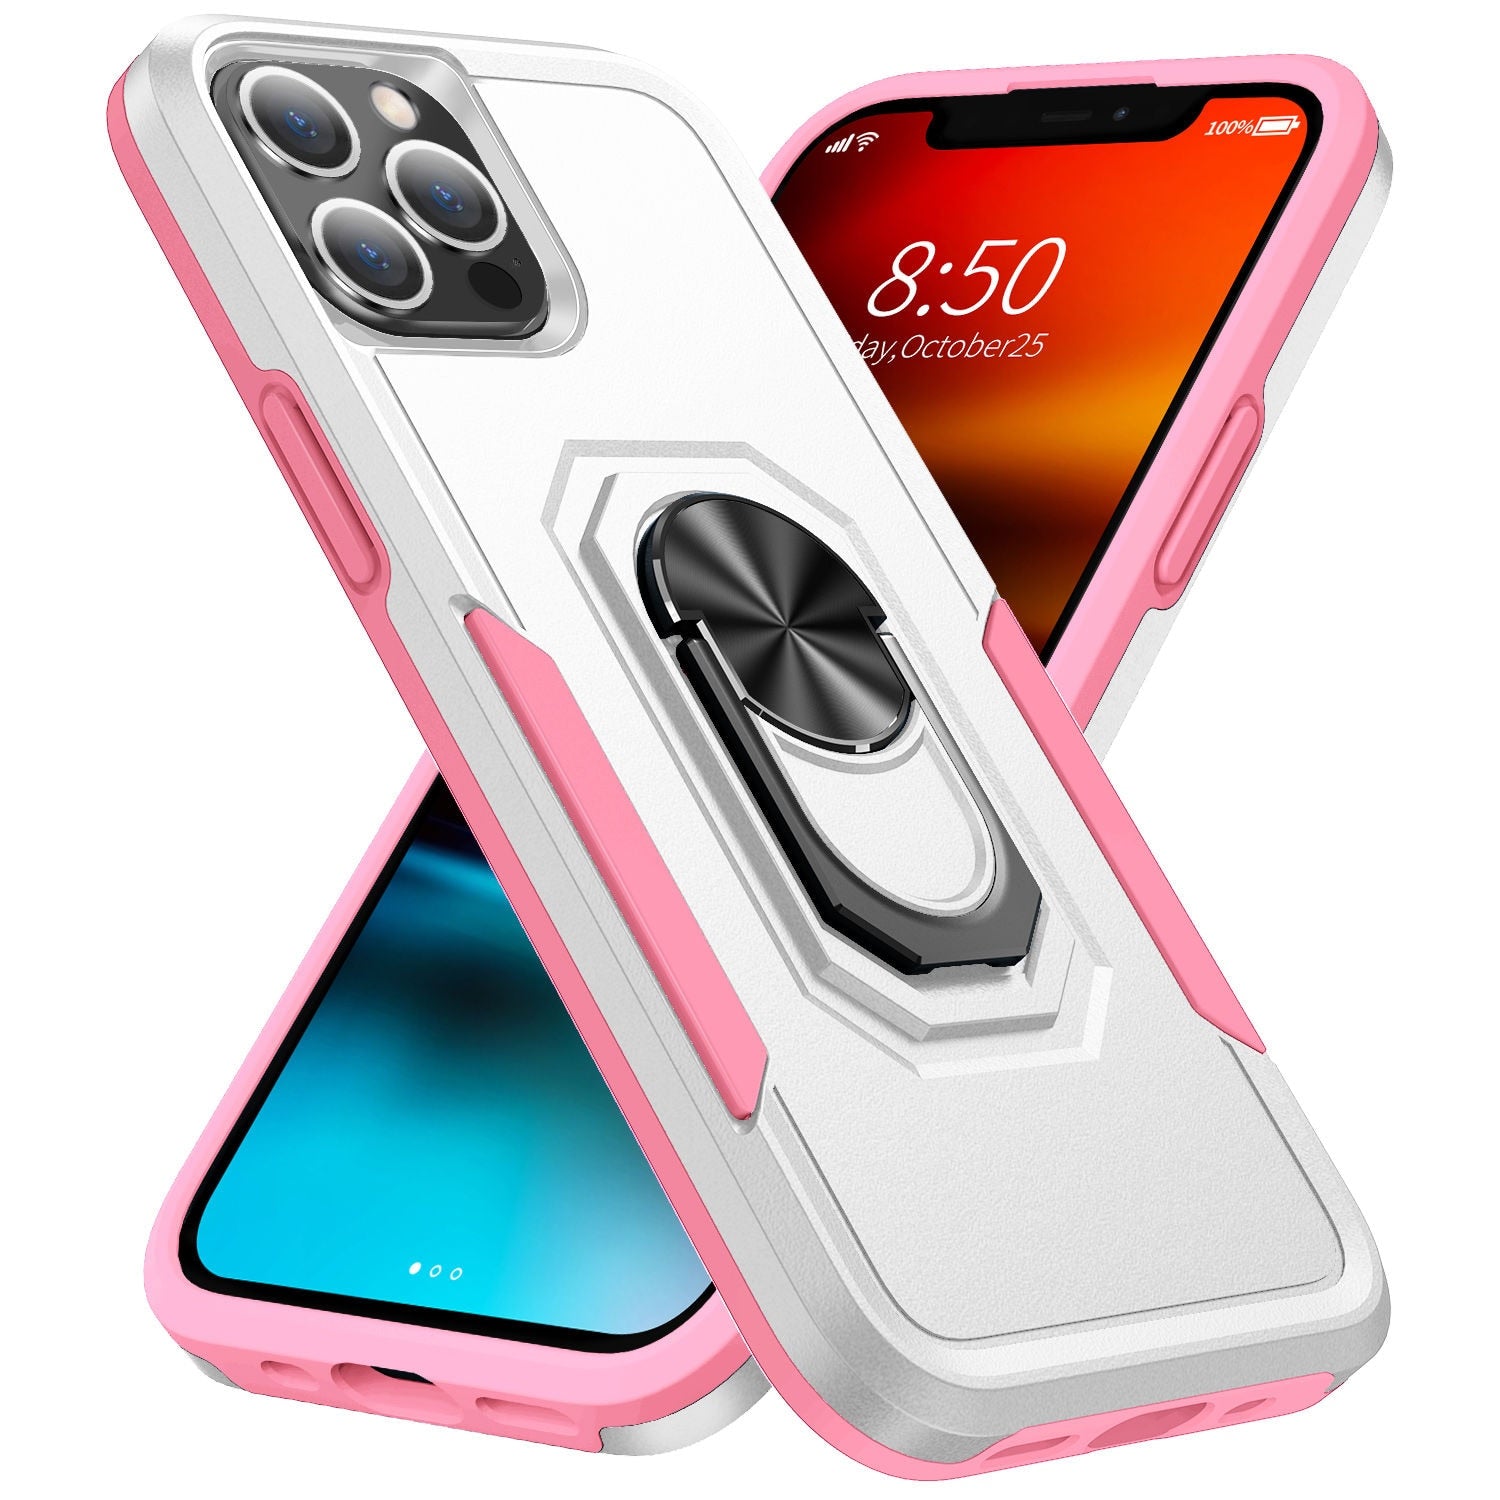 White Color Case for iPhone 11 12 13 Pro Max Case, with Stand Magnetic Ring Kickstand Bumper Shockproof Armor Heavy Duty Hard Protective Case - 380230 for iPhone 6 6S / white / United States Find Epic Store